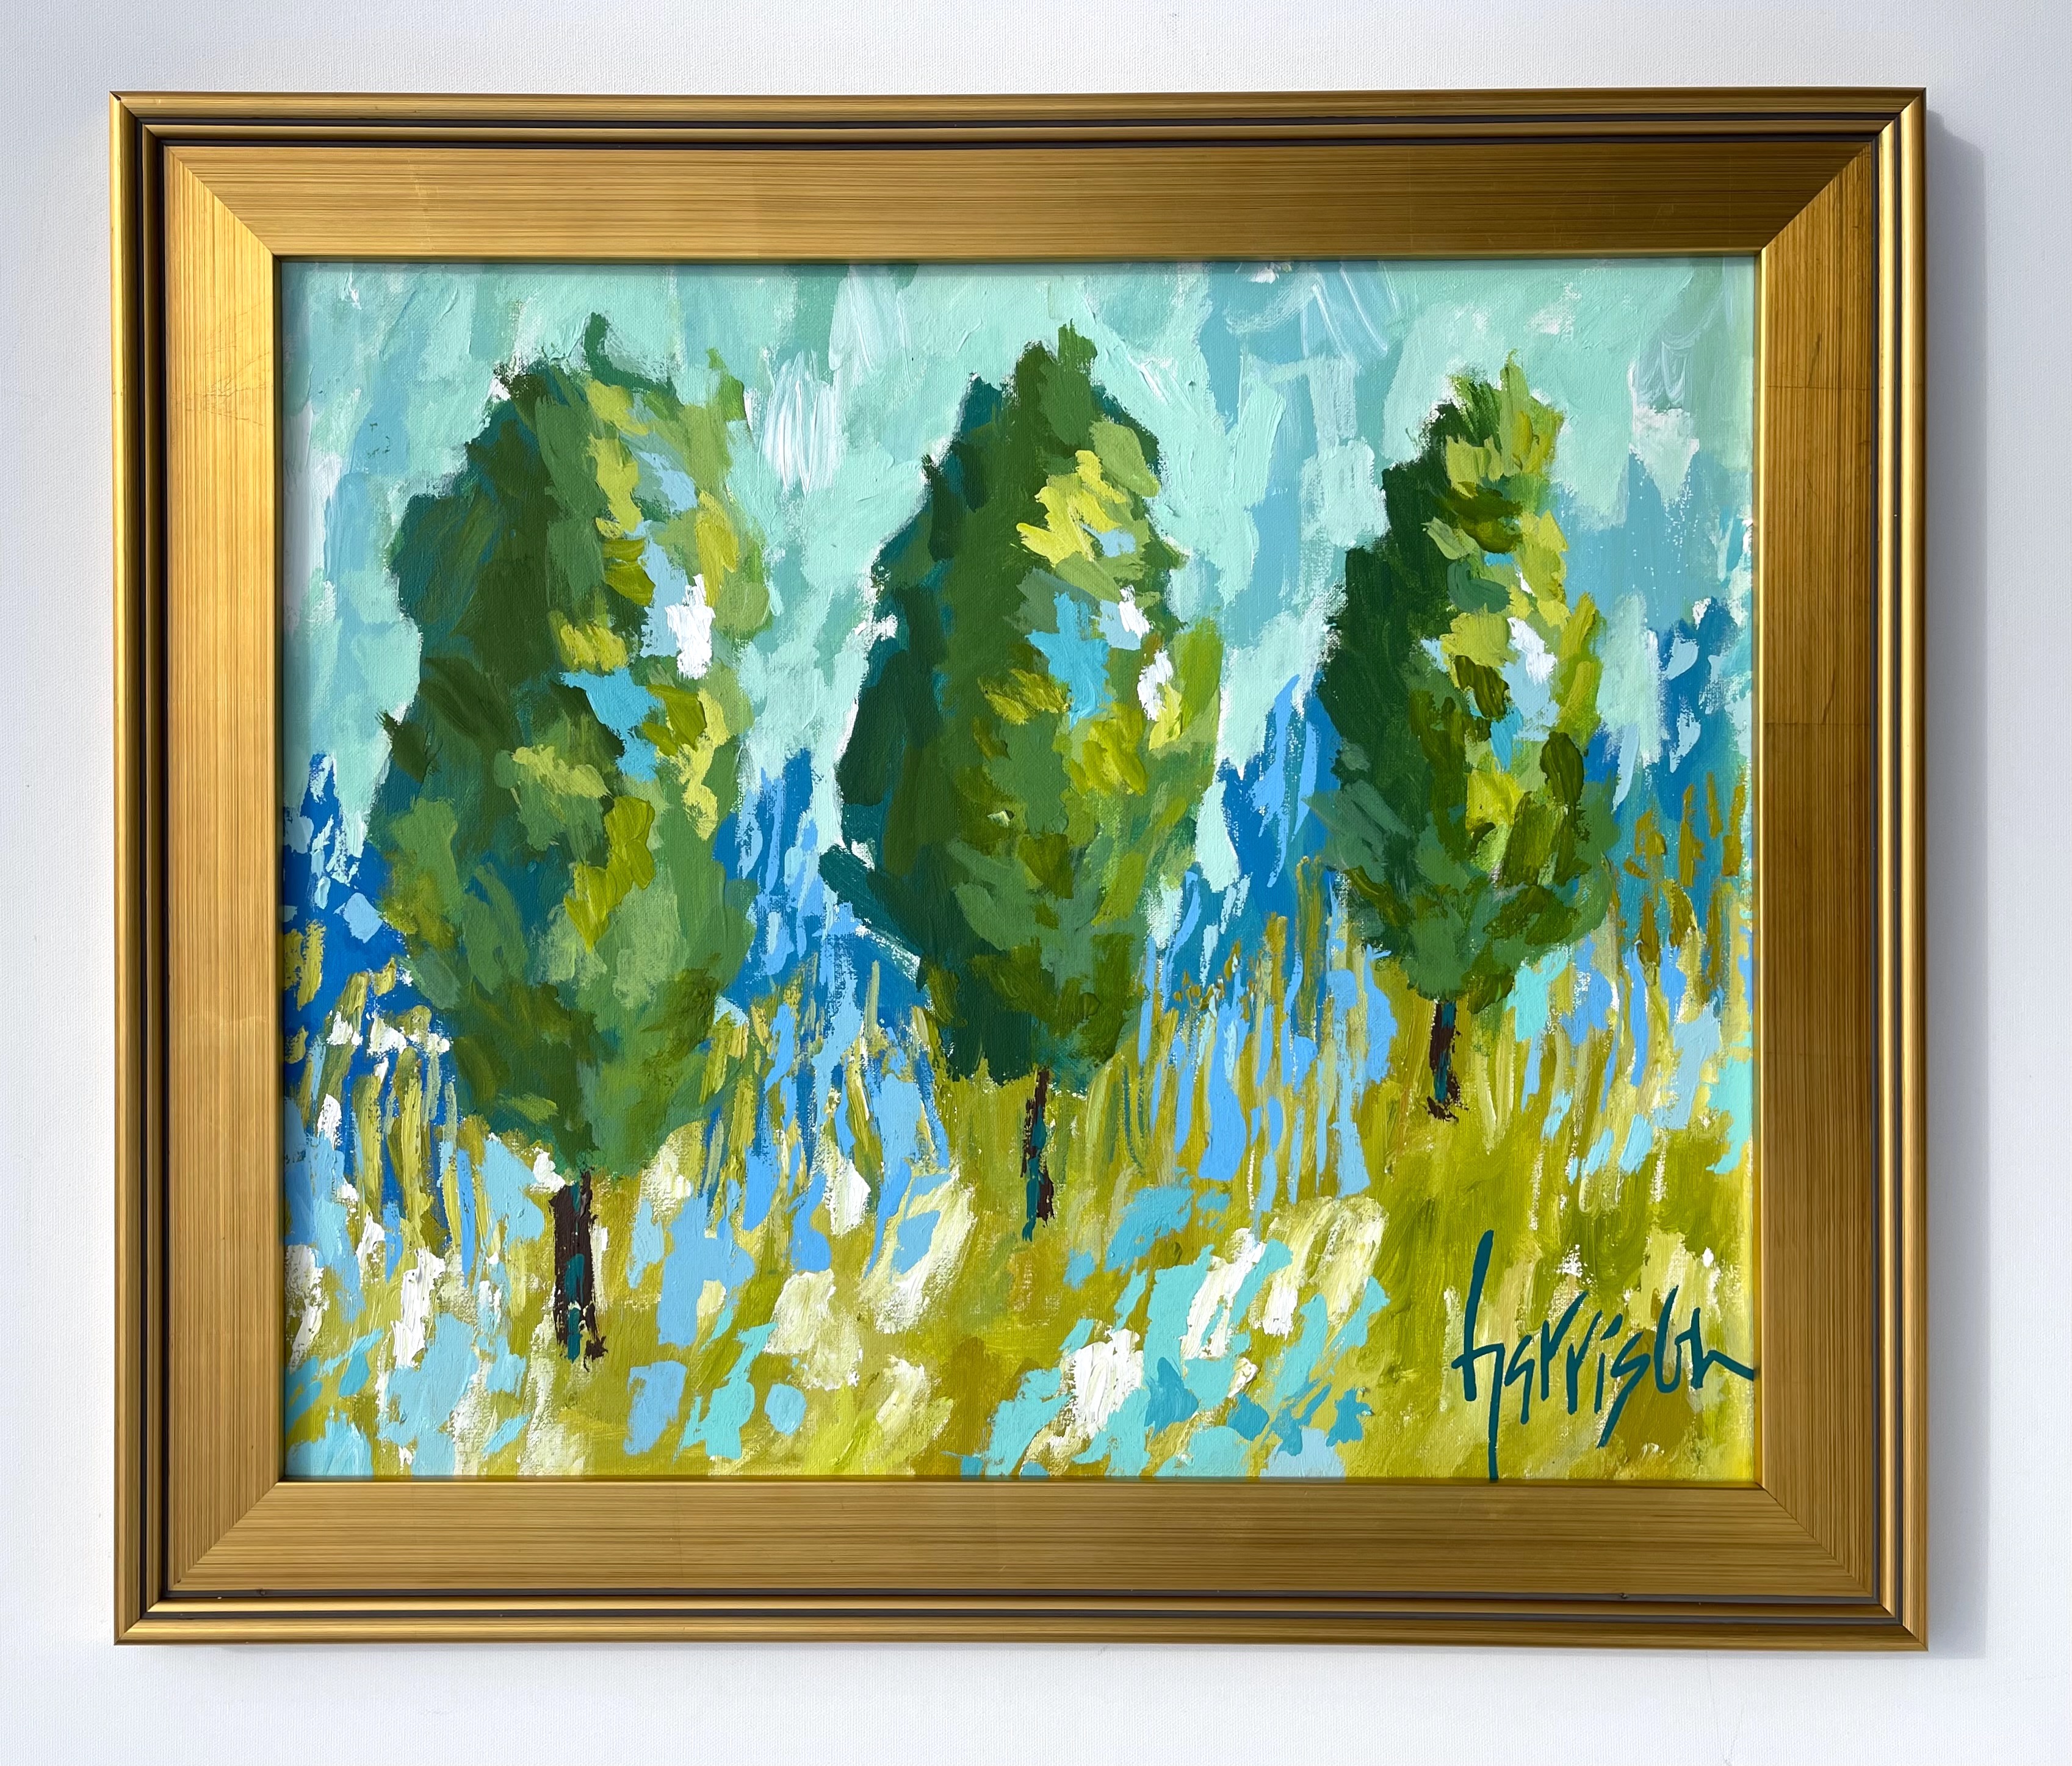 HOLIDAYS IN PROVENCE 8 - 29.5"w x 25.5"h framed